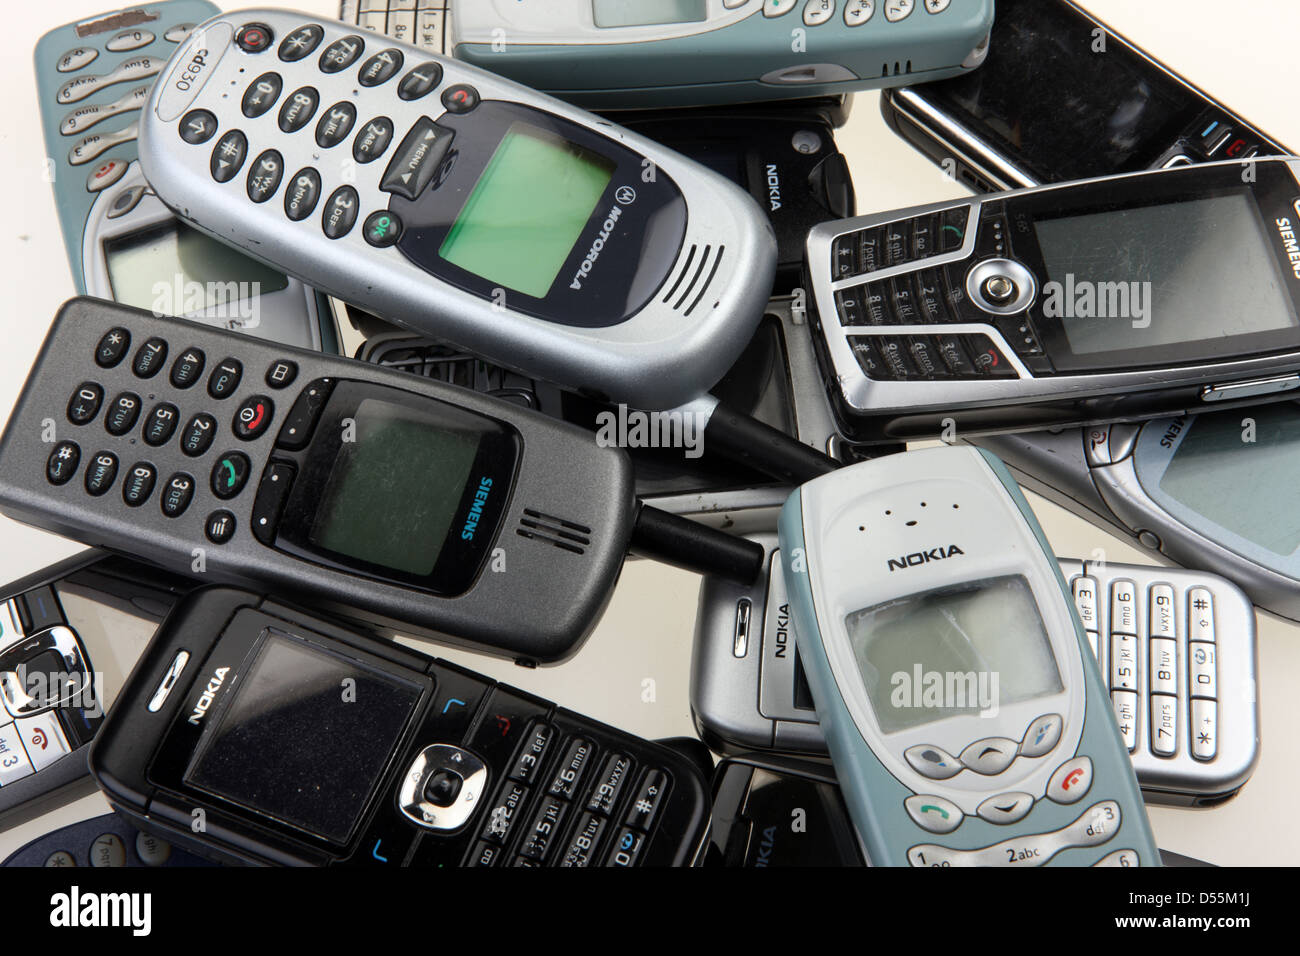 Berlin, Germany, on a pile of old cell phones Stock Photo